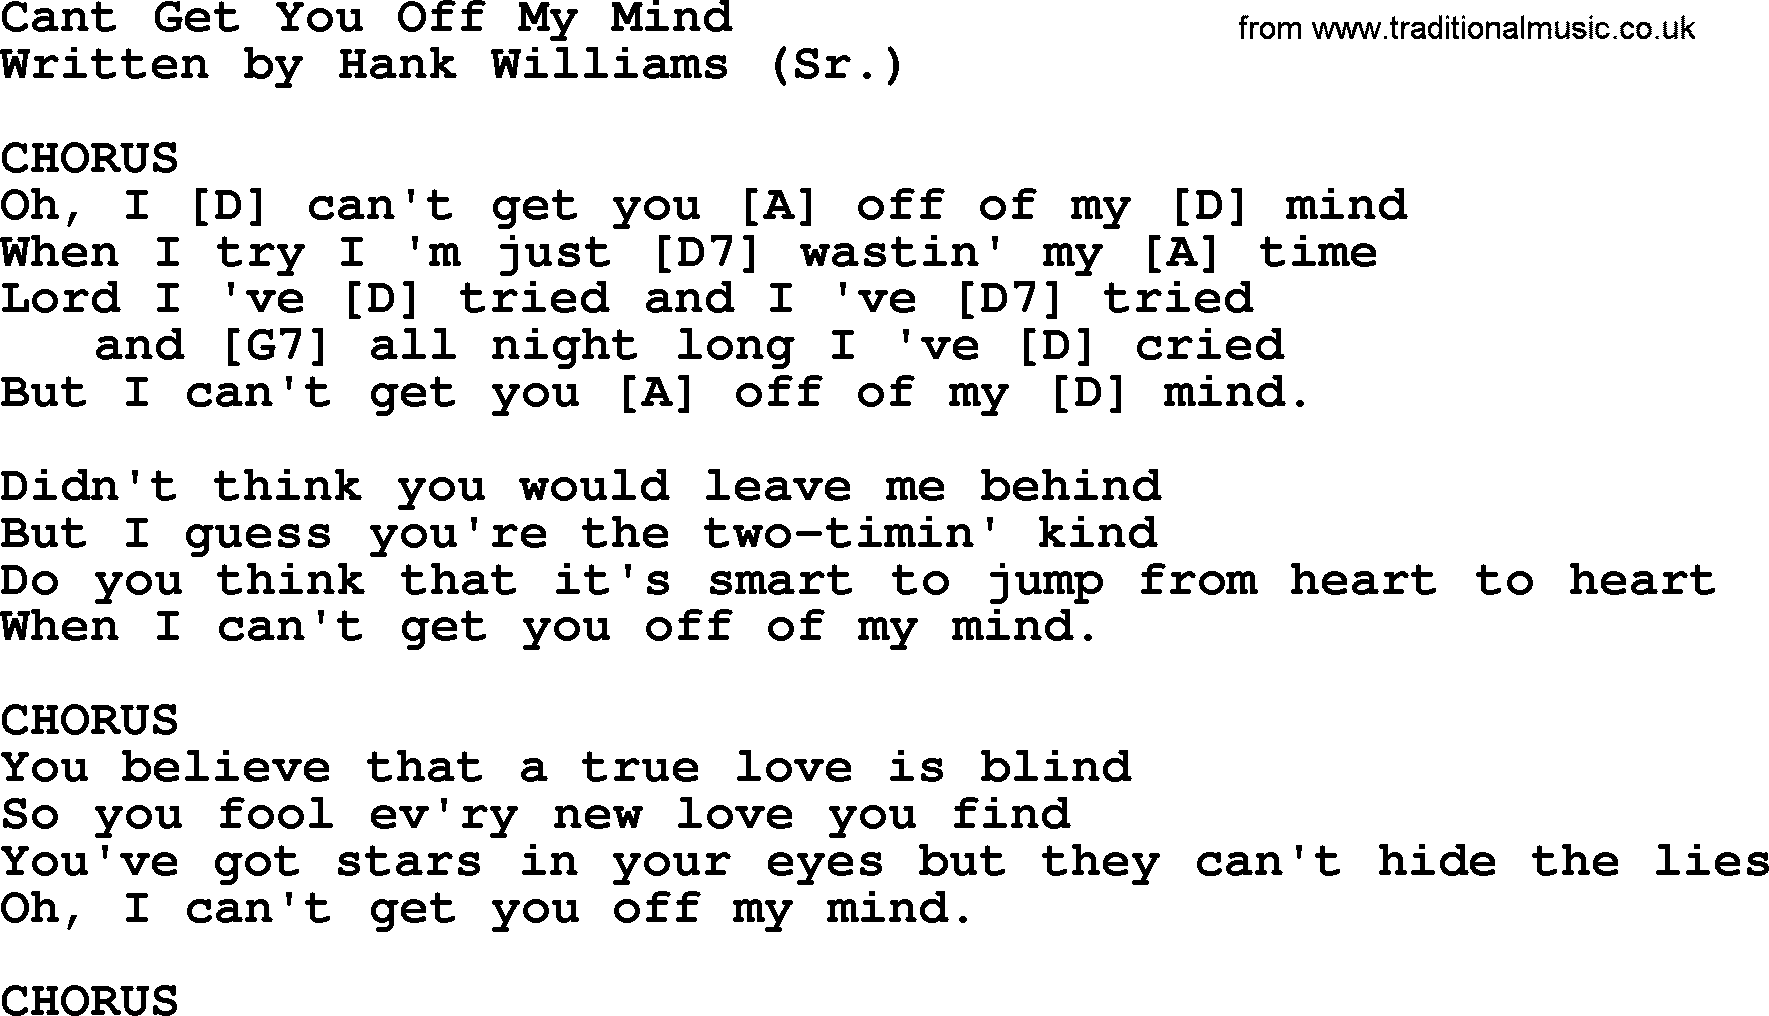 Hank Williams song Cant Get You Off My Mind, lyrics and chords